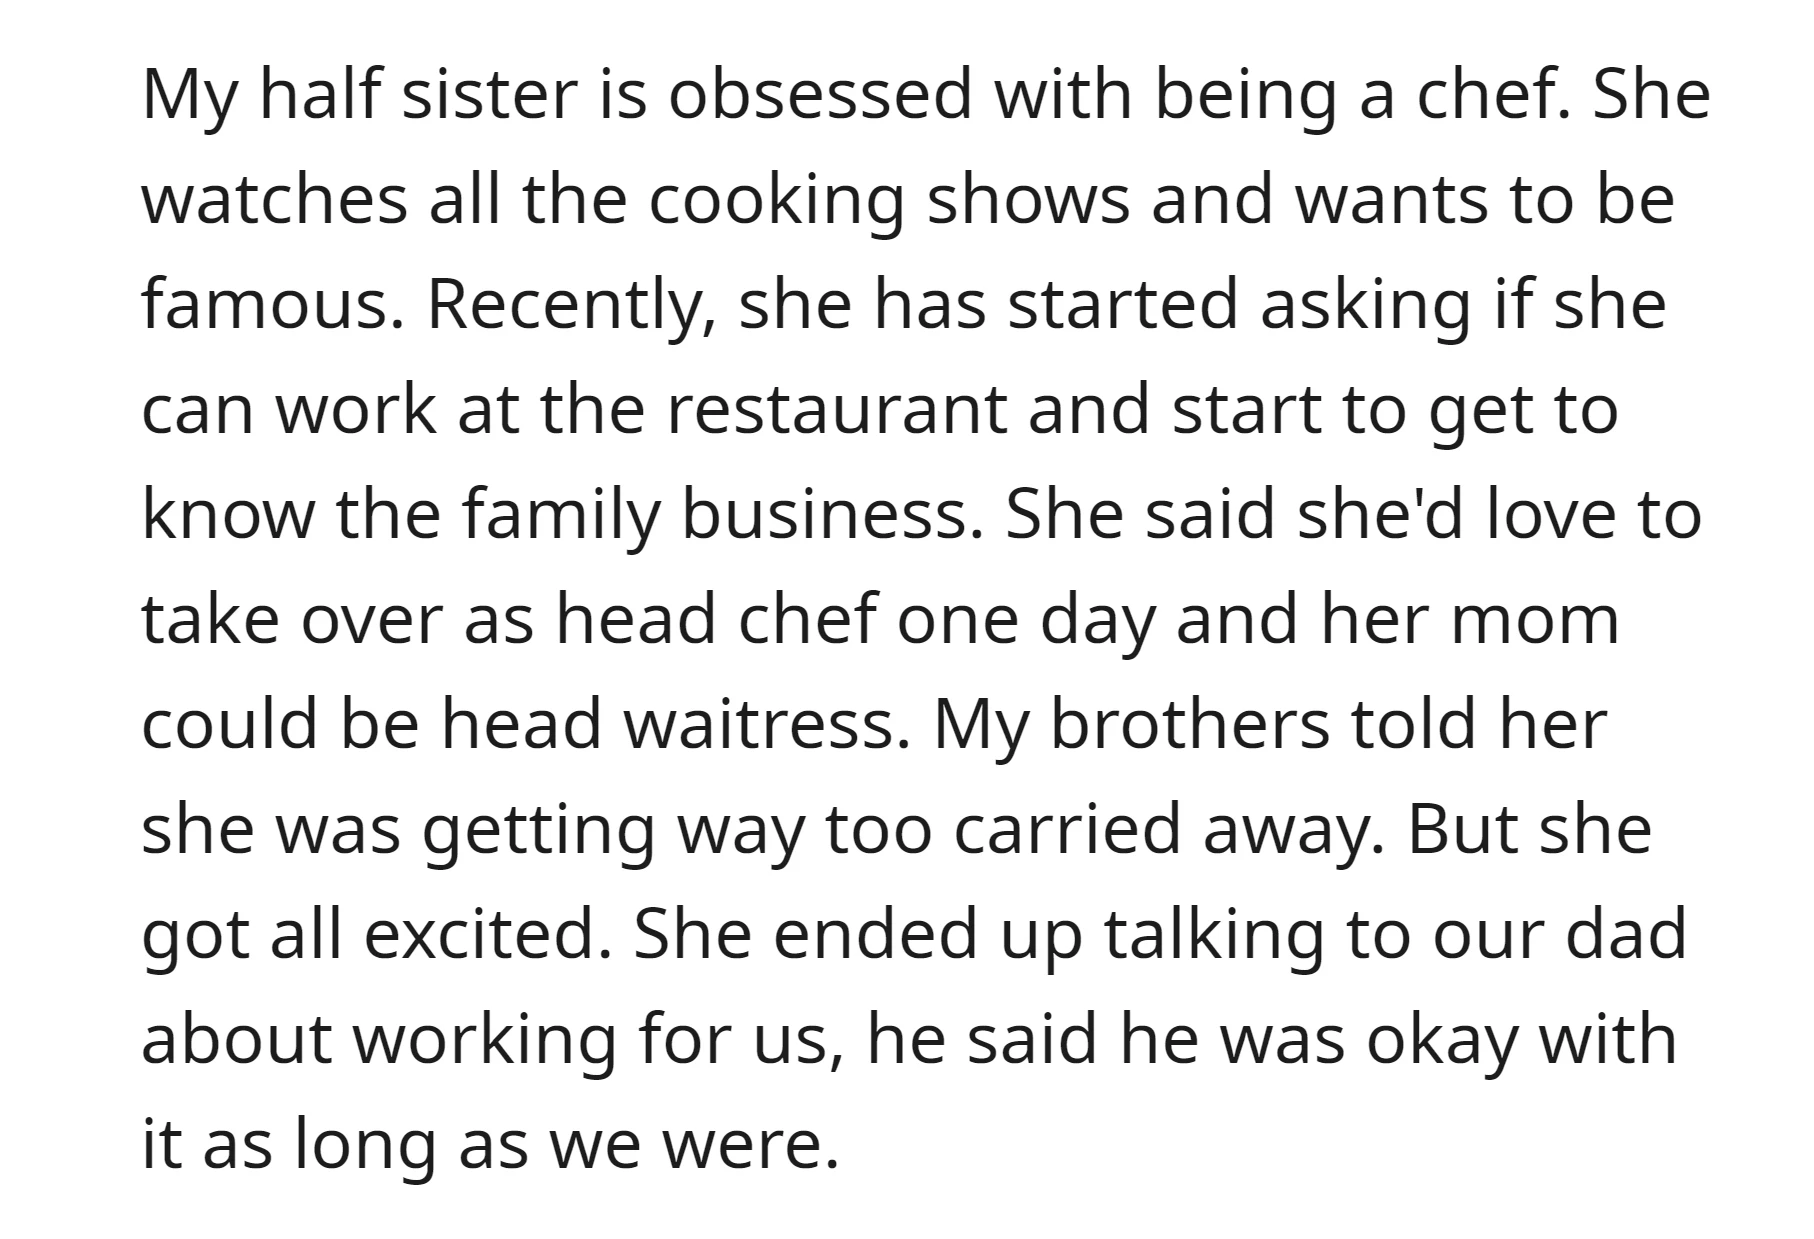 OP's half sister expressed eagerness to work at the family restauran